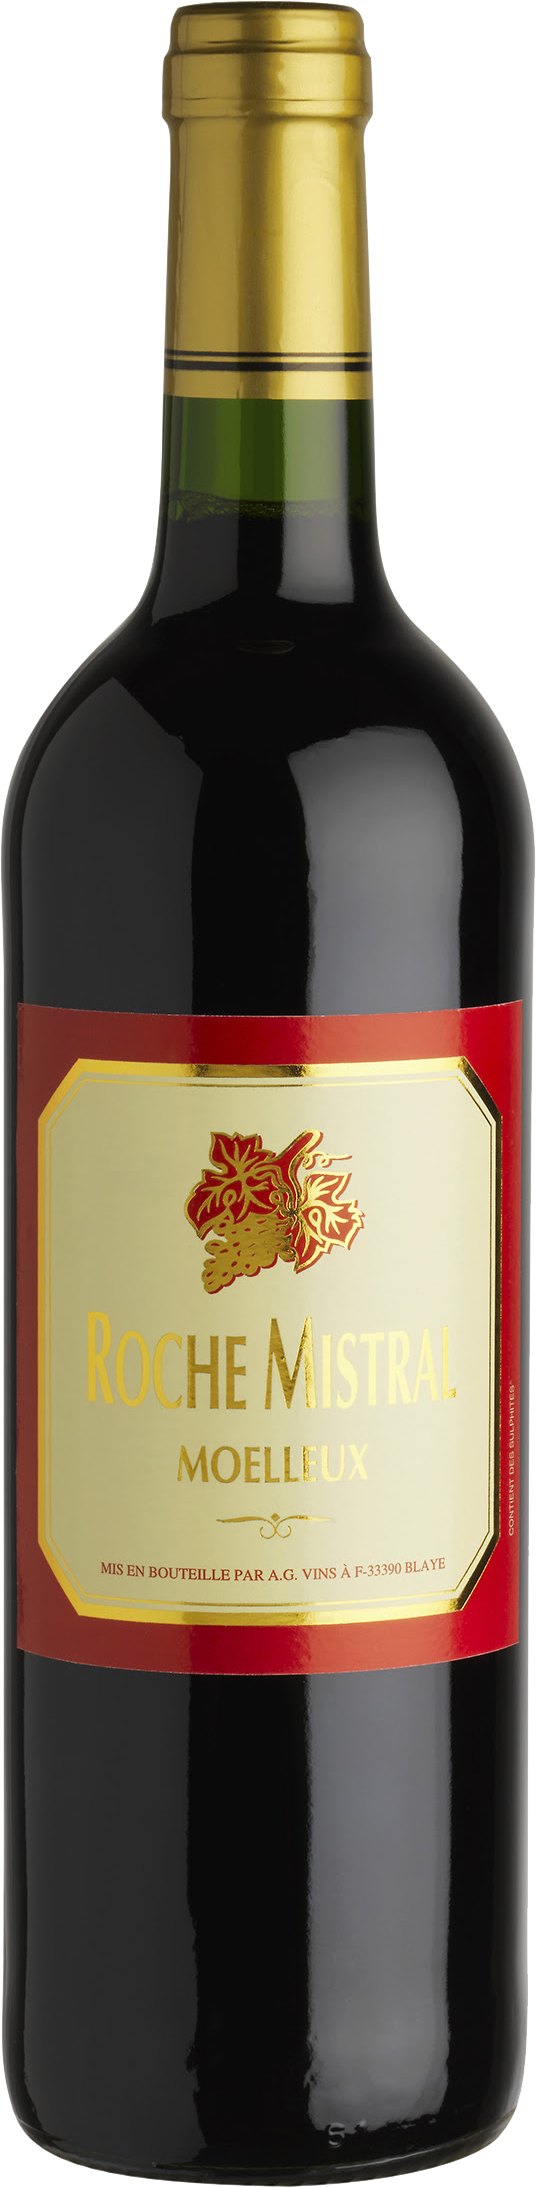 Roche Mistral Rouge Moelleux